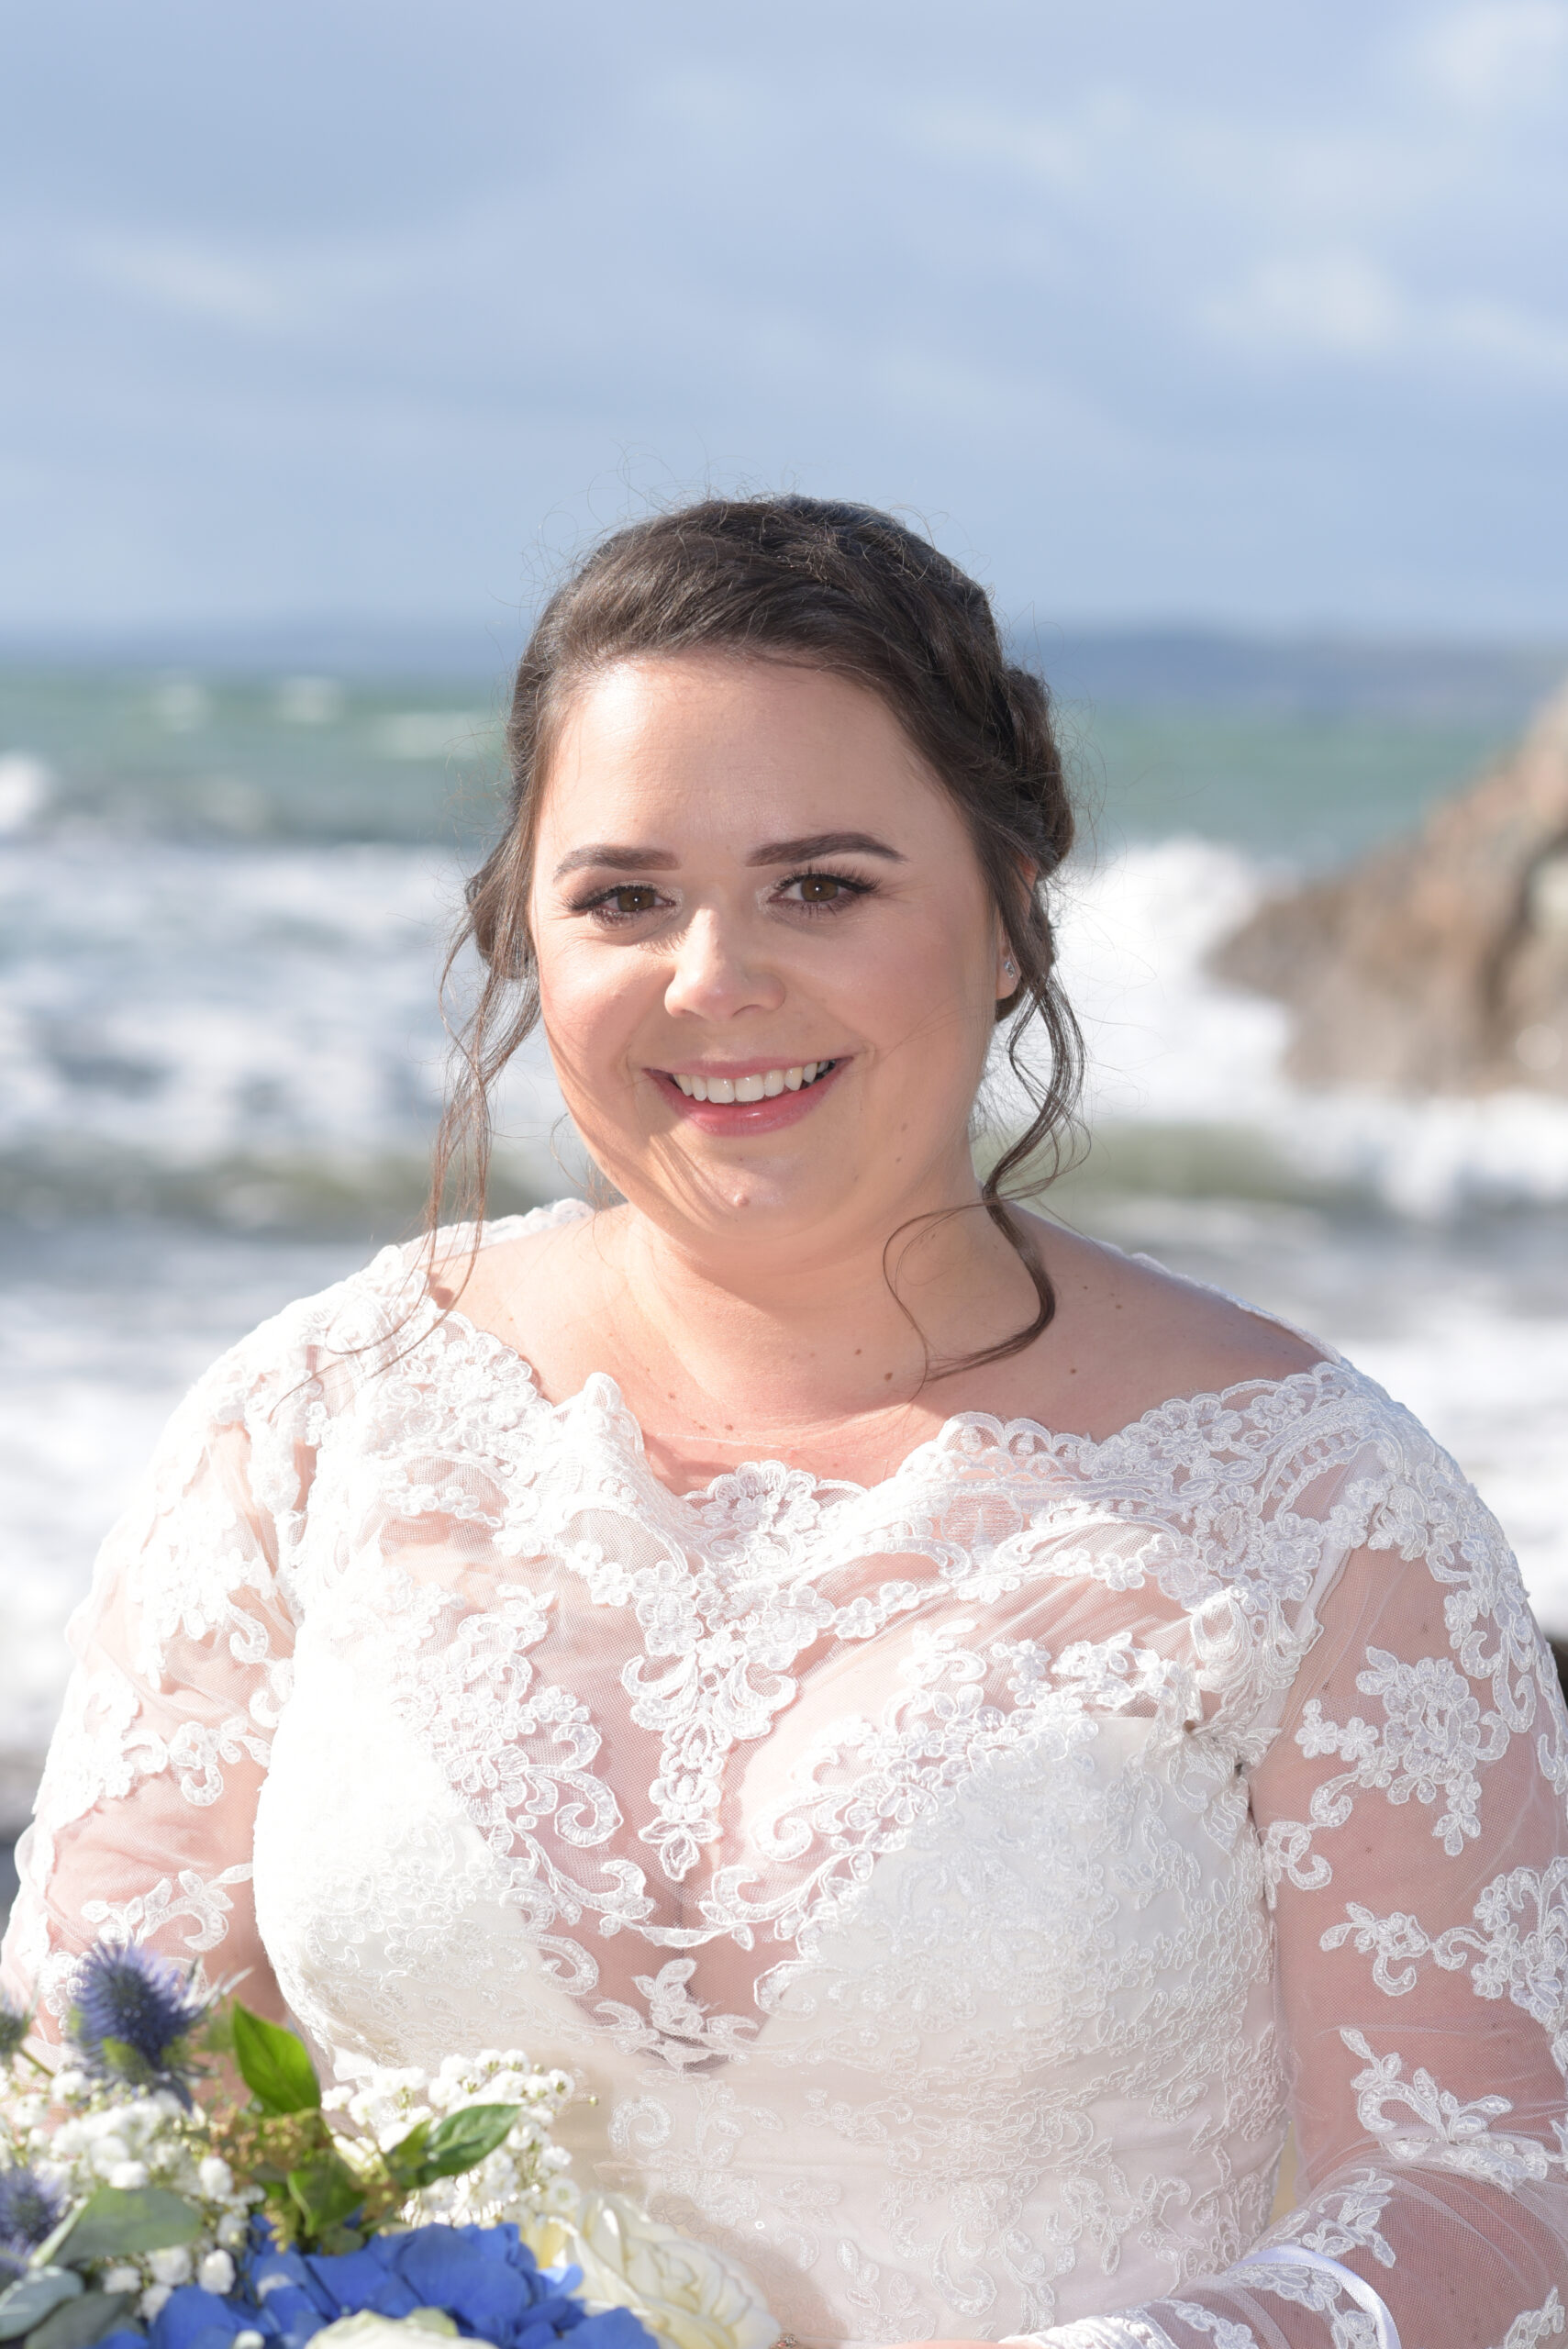 Wedding Photography on the Beach at Polhawn Fort The bride on the beach